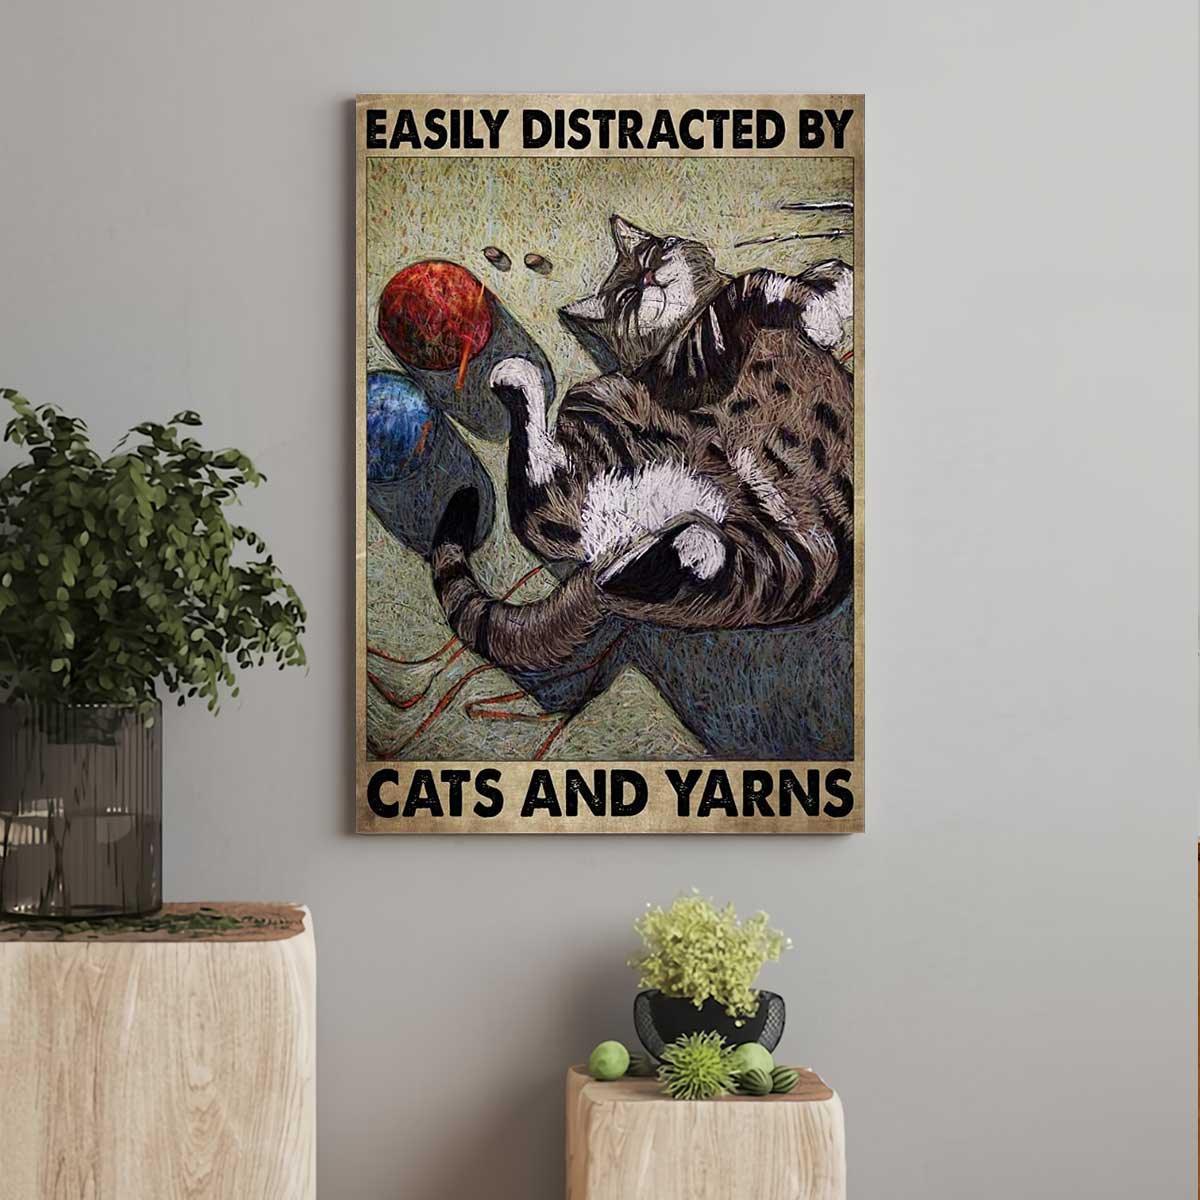 Cat Portrait Canvas - Easily Distracted By Cats And Yarns, Funny Cat Premium Wrapped Canvas - Gift For Cat Lovers, Family, Friends - Amzanimalsgift